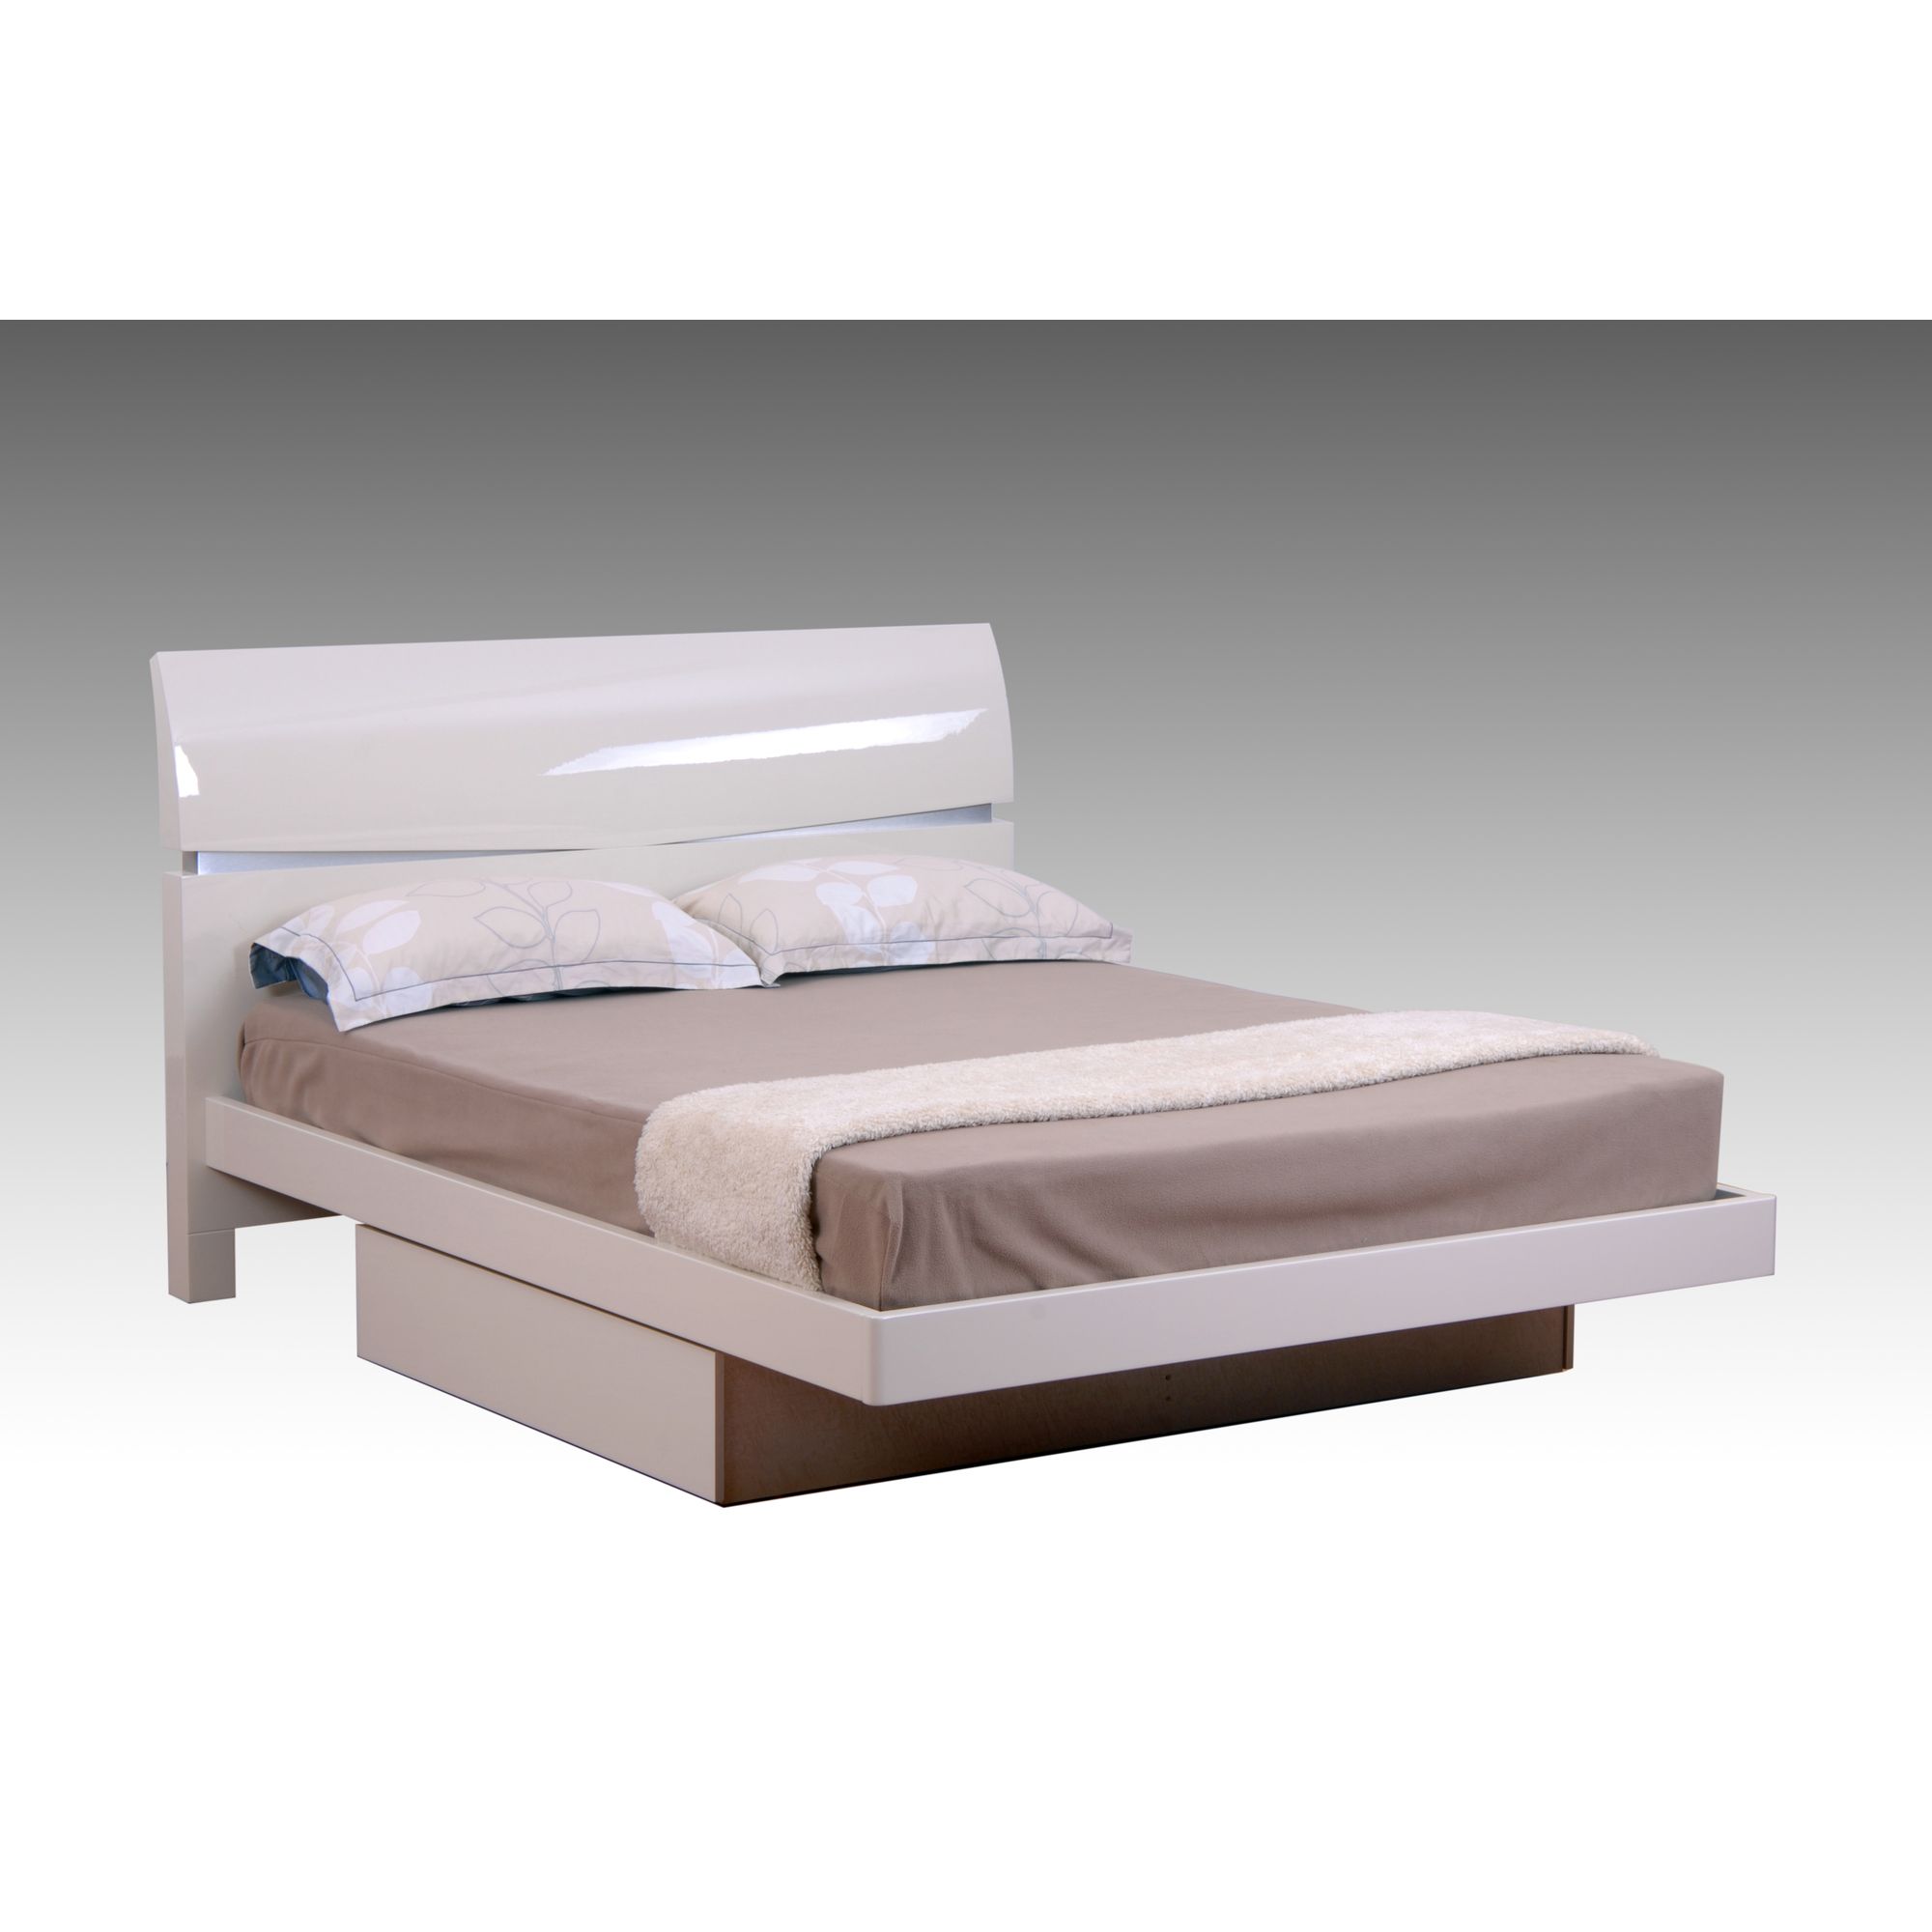 Elements Isabel Bed with Drawers - double at Tesco Direct